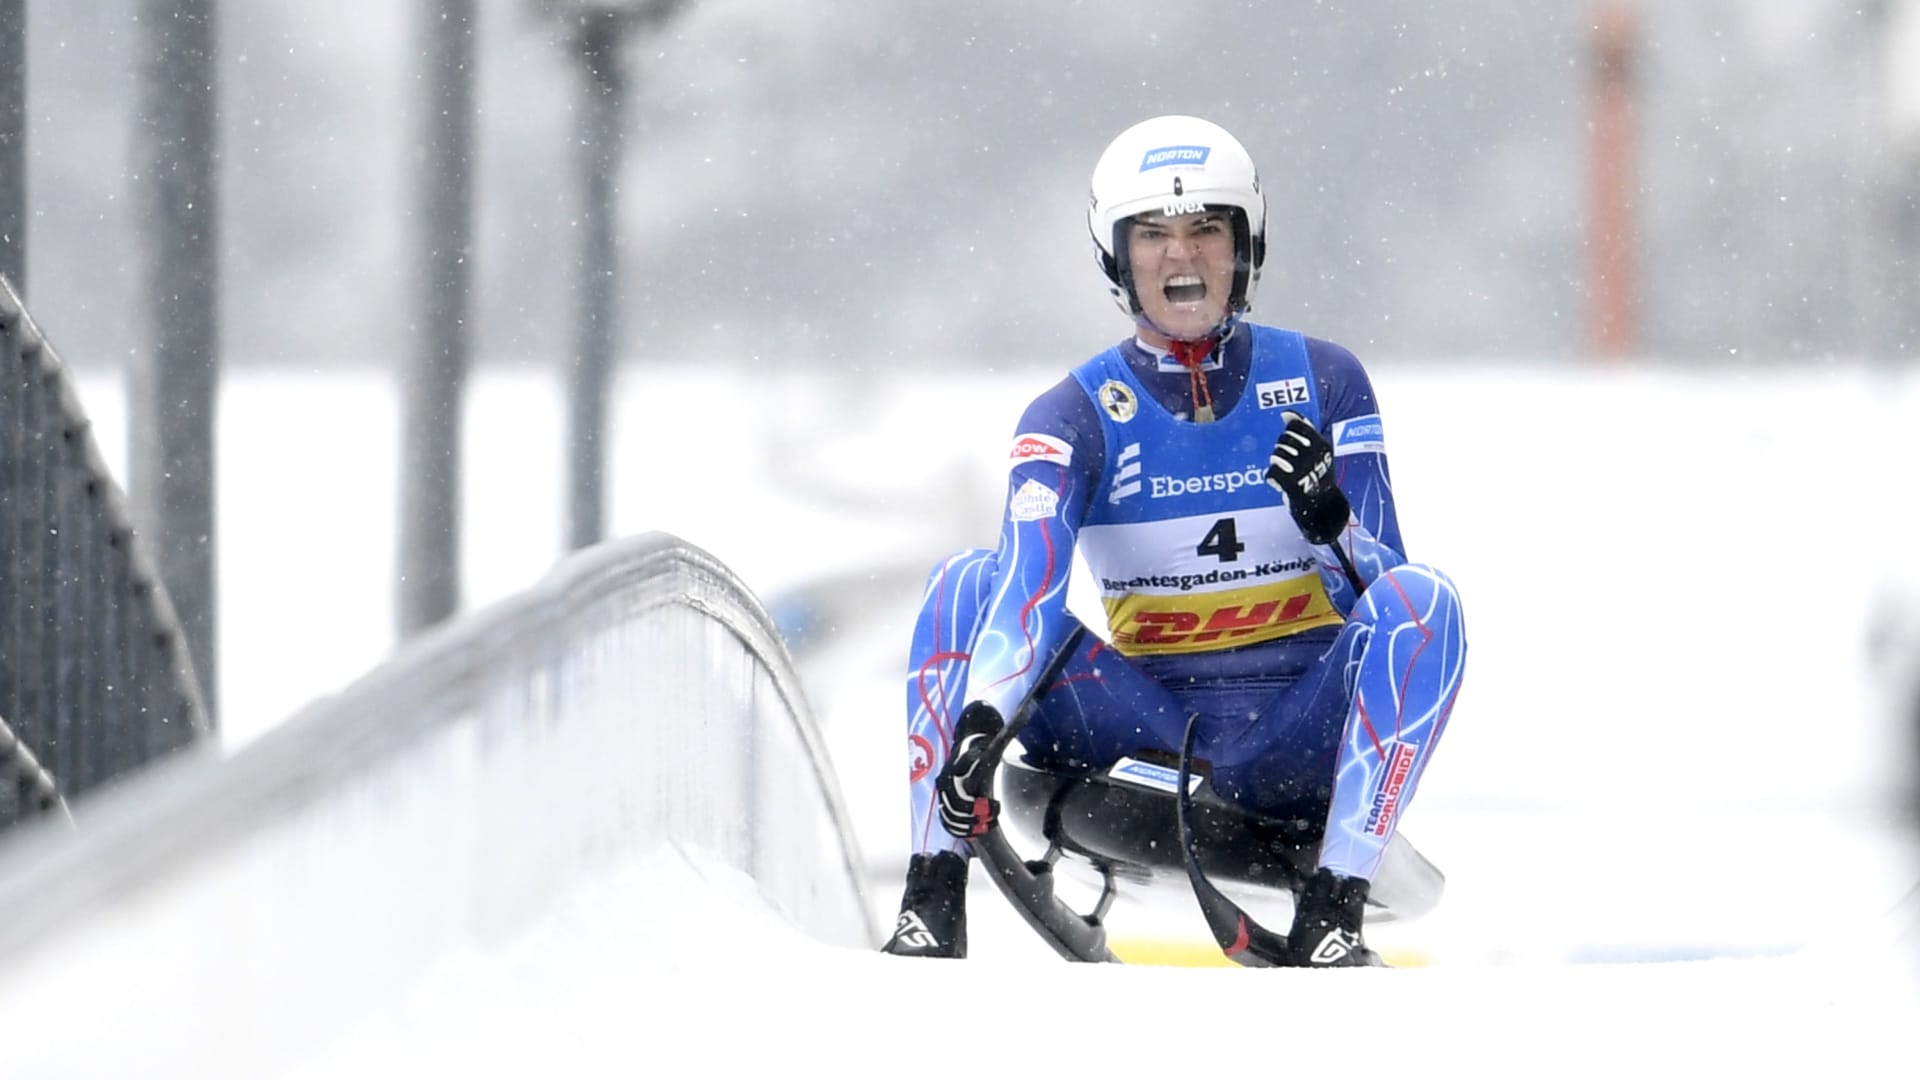 Summer Britcher of the United States competes at the 50th FIL Luge World Championships 2021 LOTTO in Koenigssee, Germany.